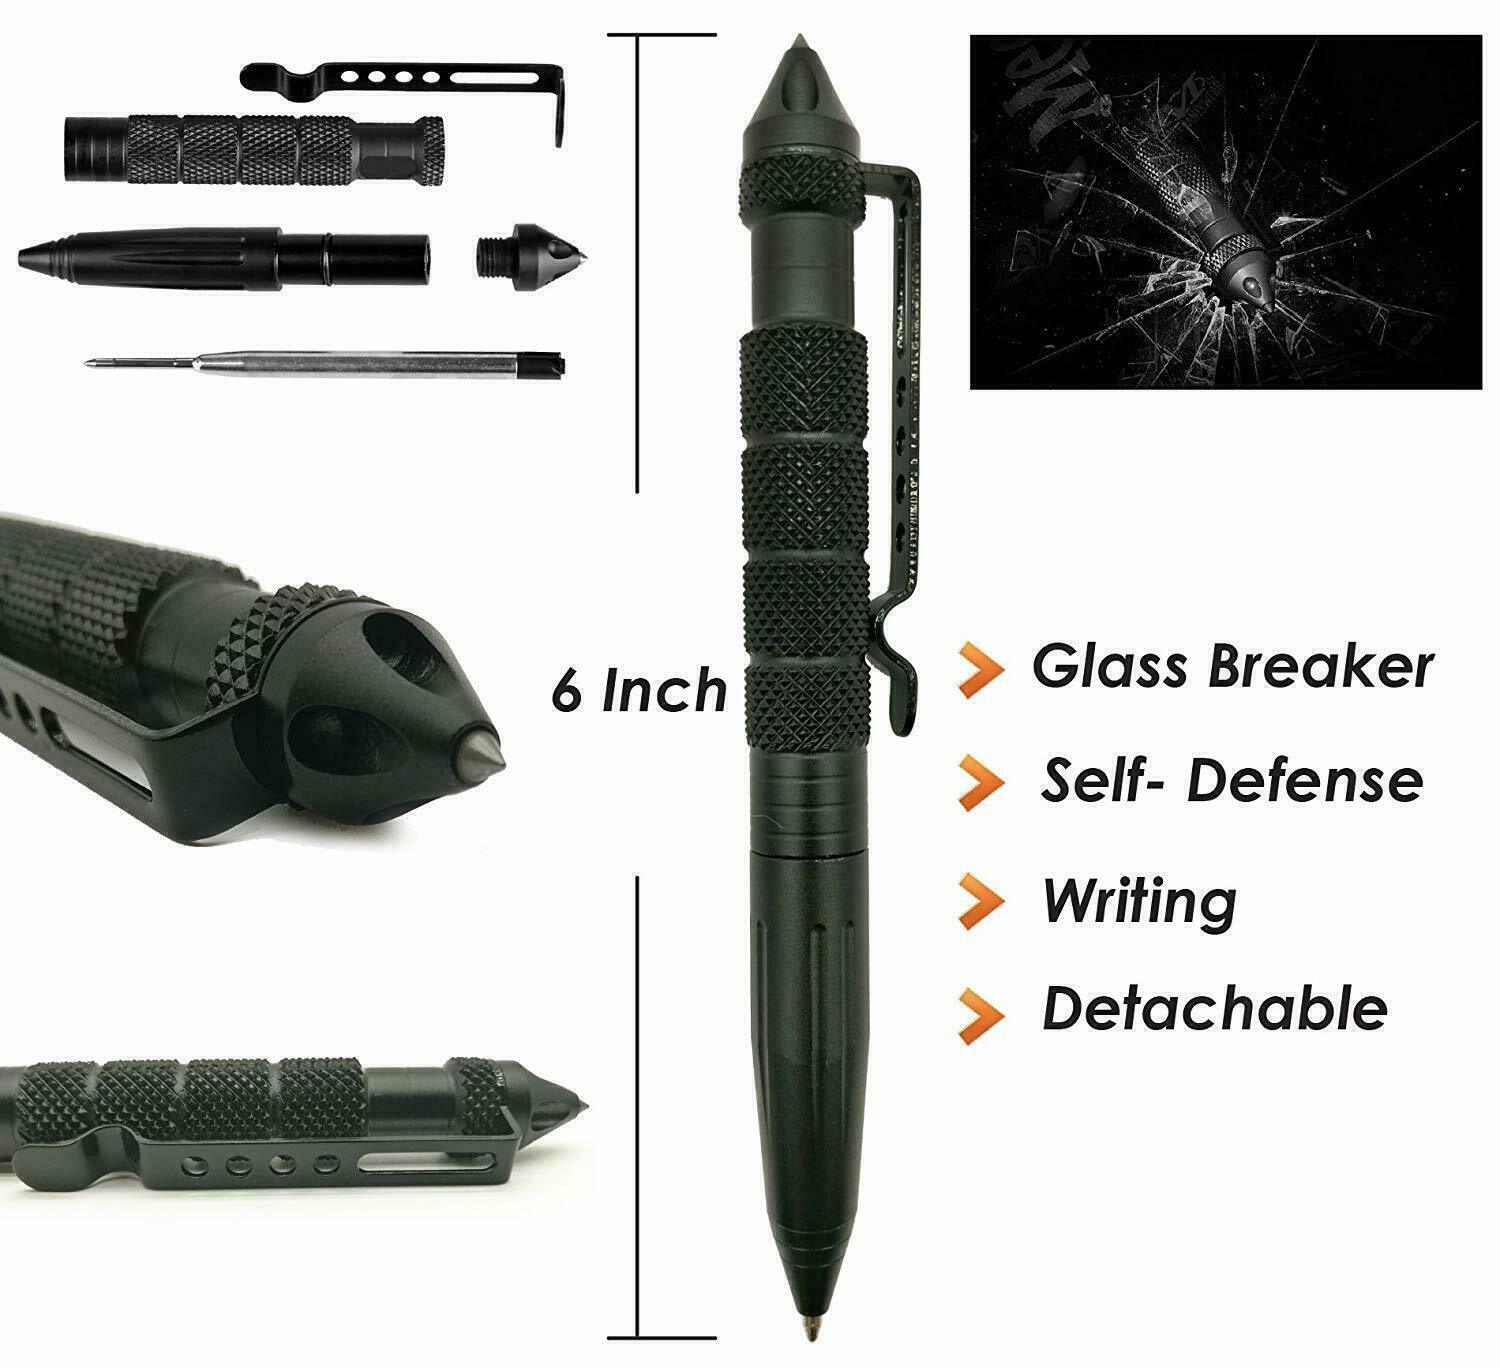 14in1 Outdoor Emergency Survival Gear Kit Camping Hiking Survival Gear Tools Kit Survival Gear And Equipment, Outdoor Fishing Hunting Camping Accessories